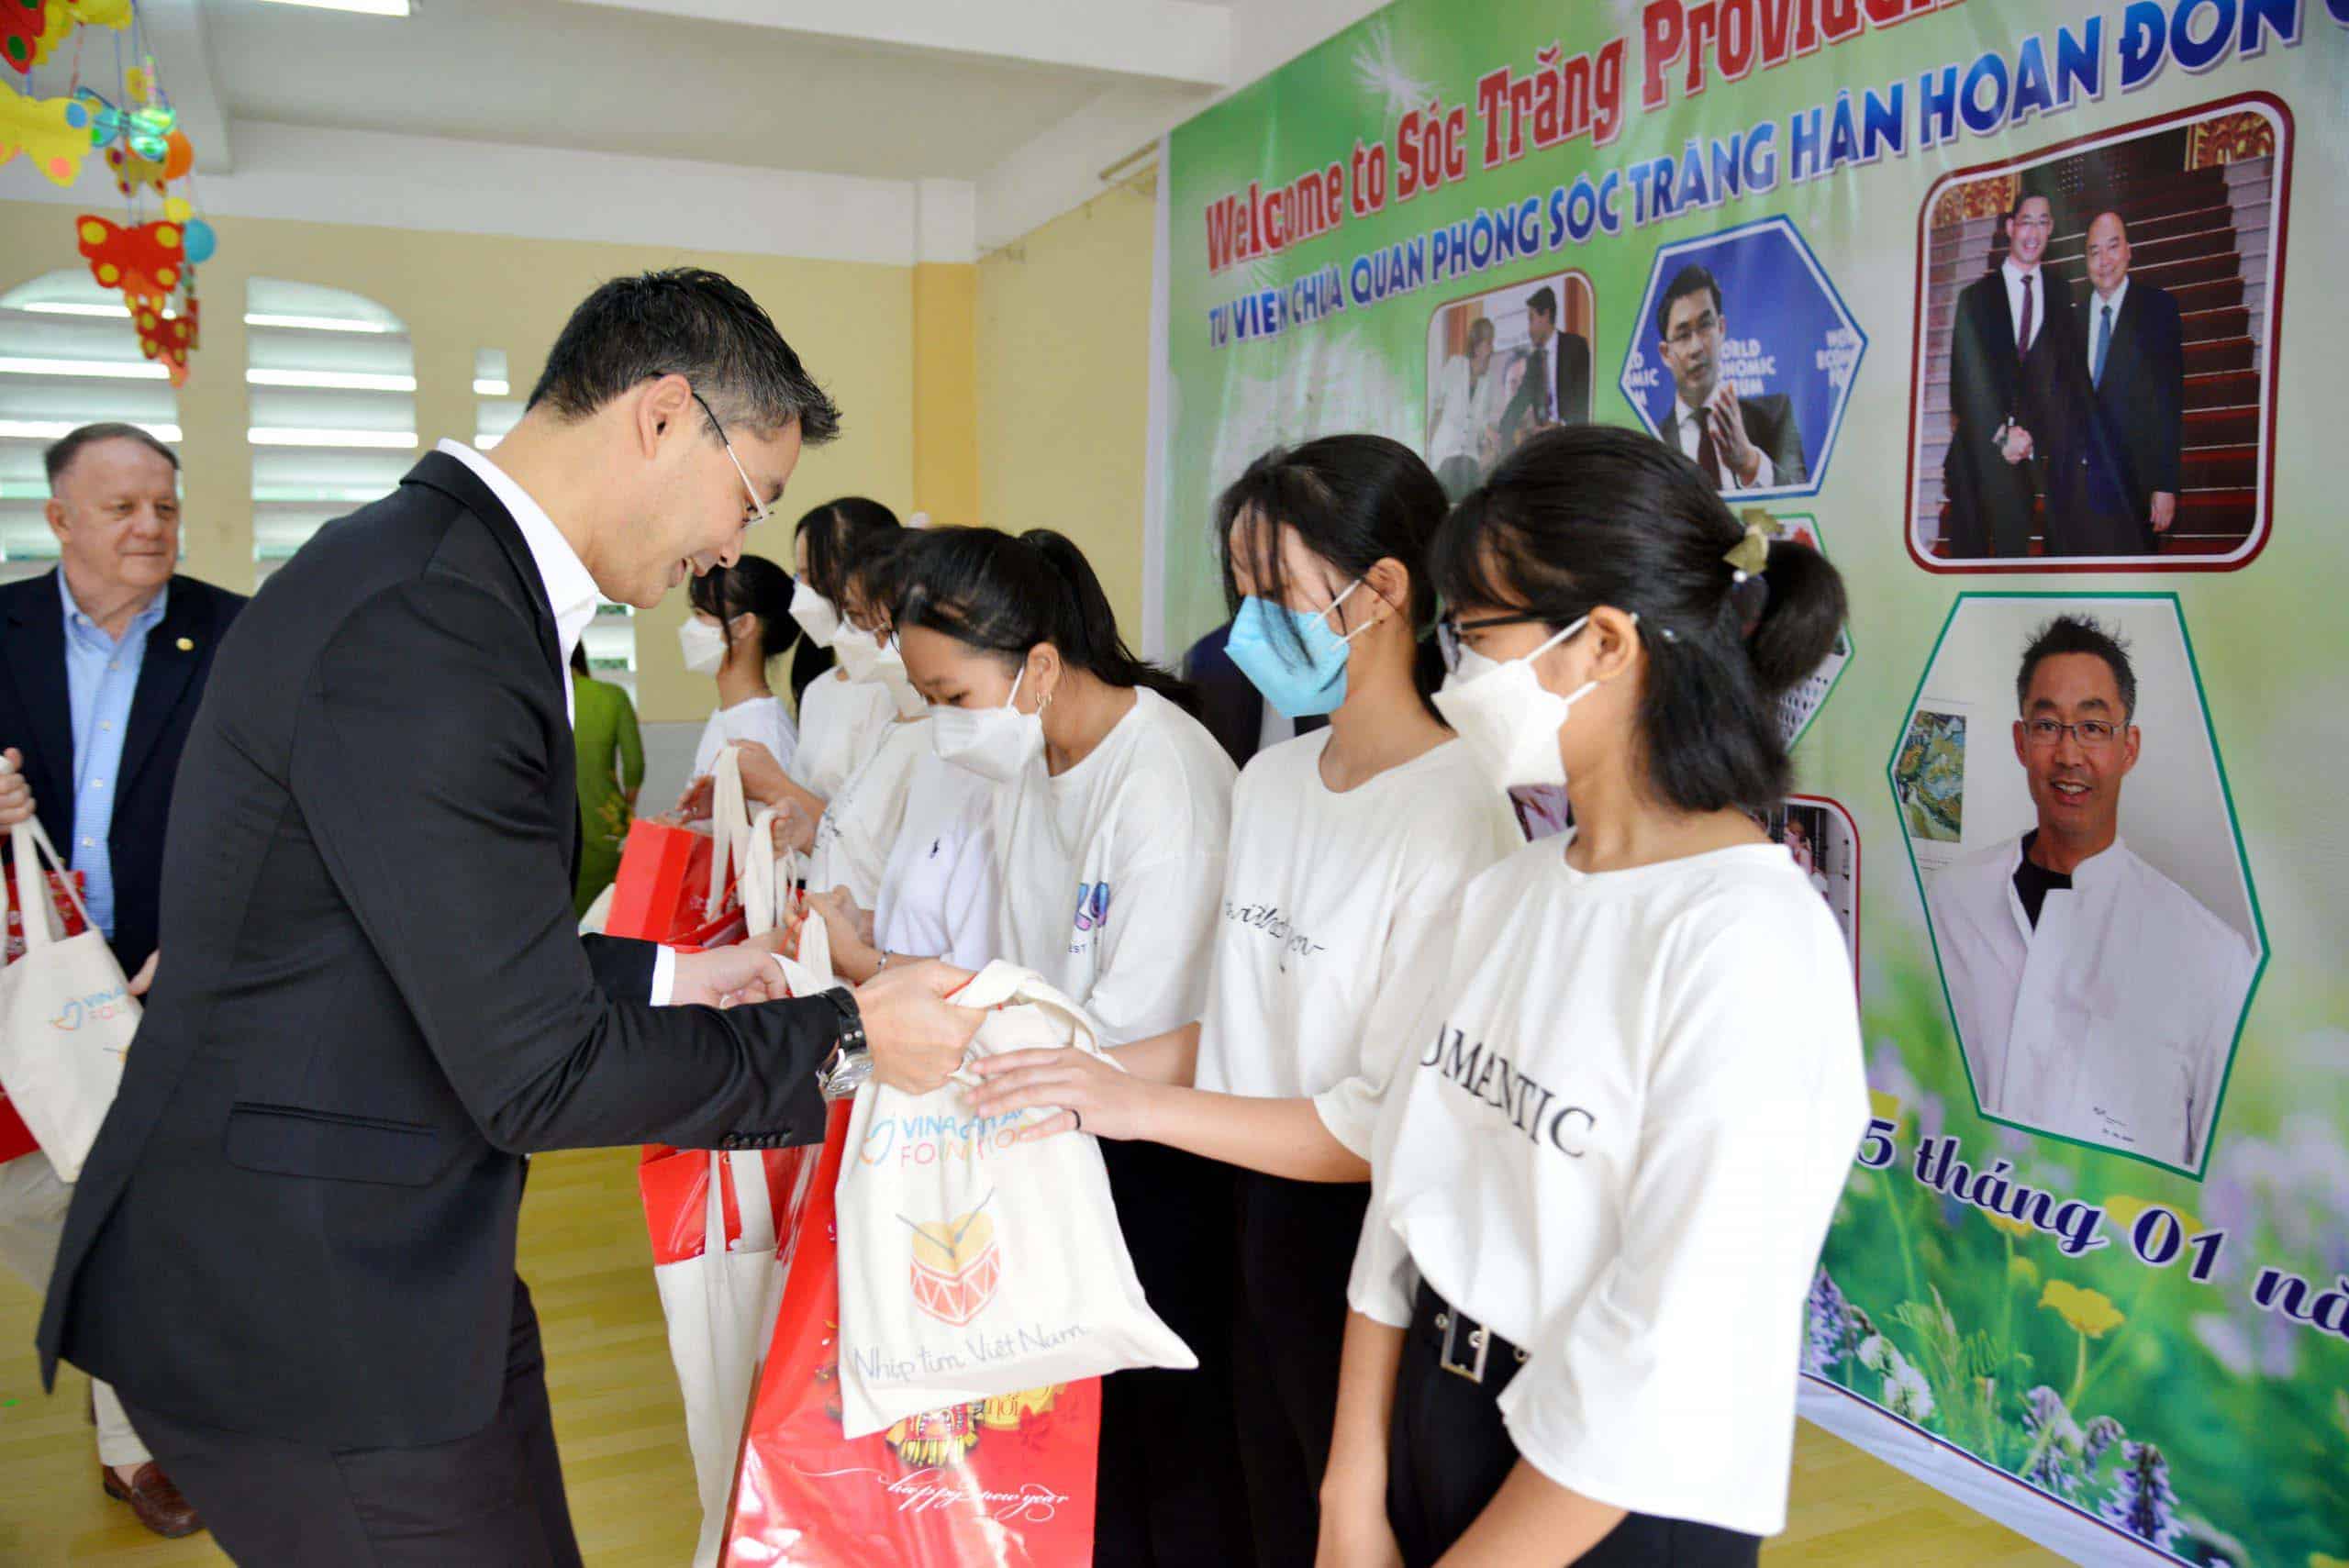 Dr. Philipp Rösler and VinaCapital Foundation visited and donated to an orphanage in Soc Trang province